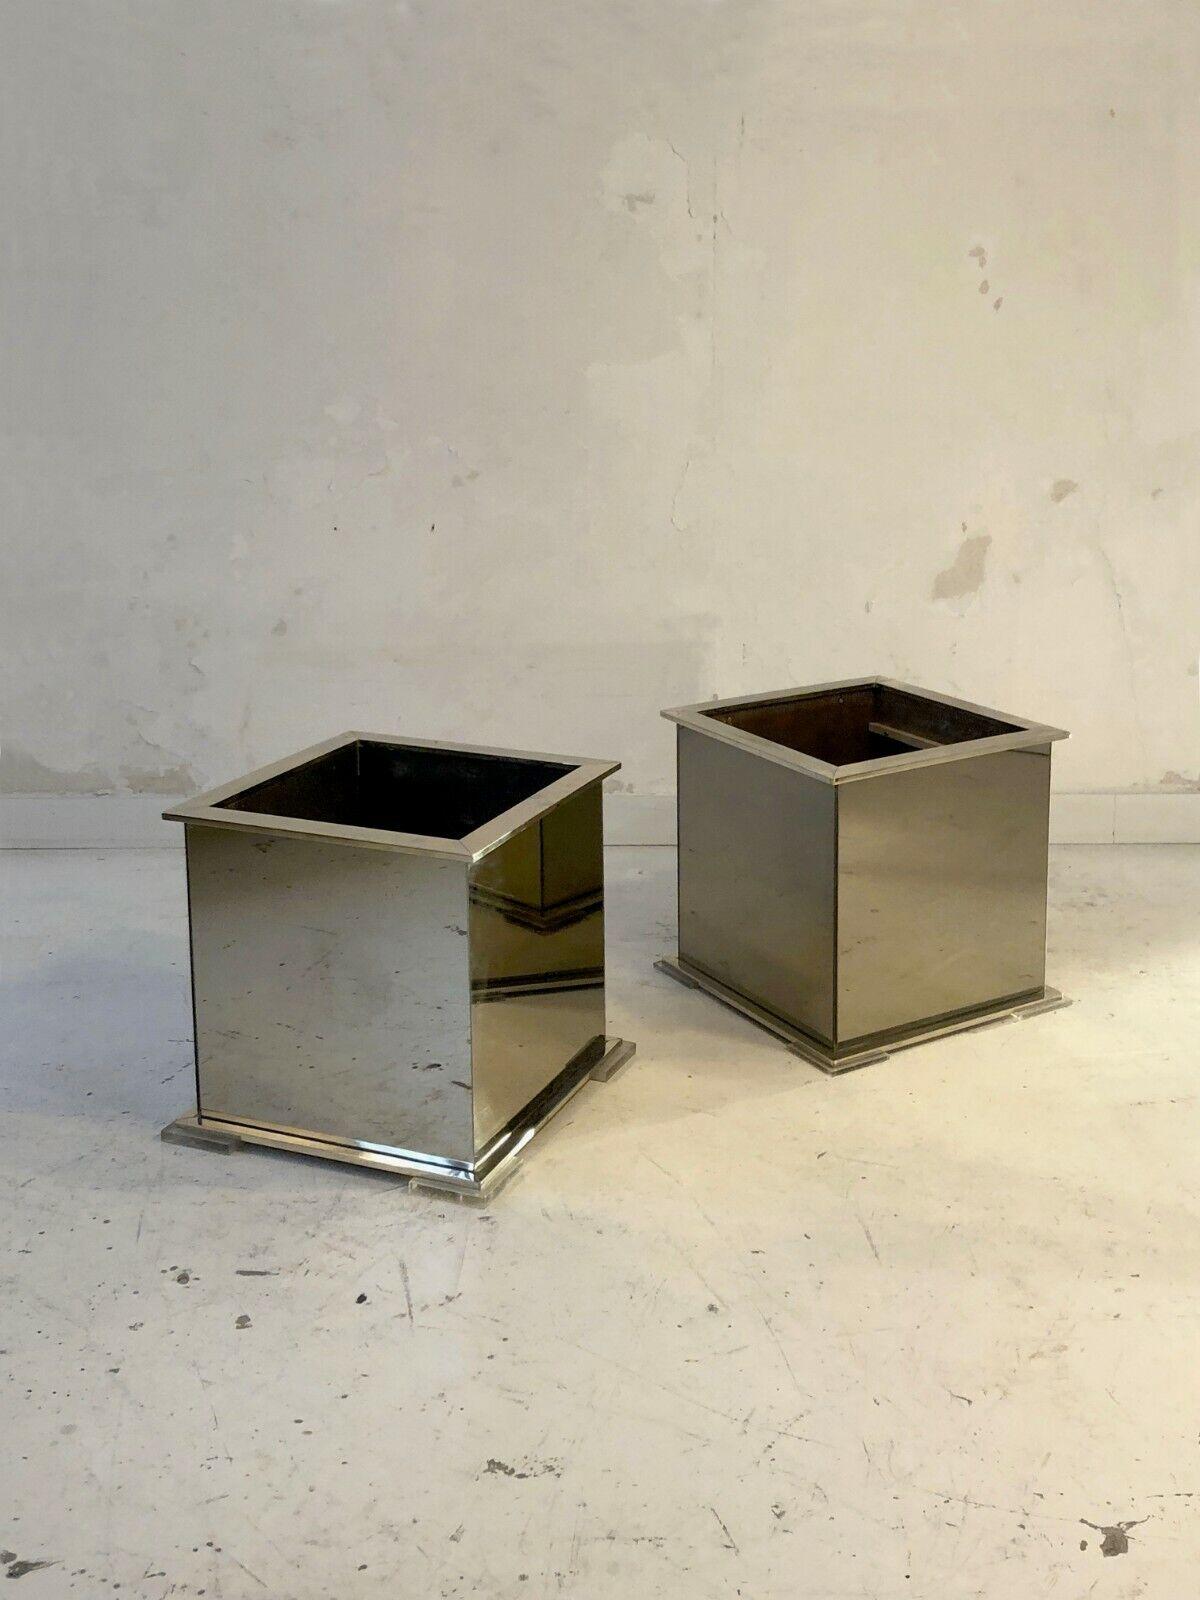 An elegant and rigorous pair of large square planters or planters, Art-Deco, Modernist, Shabby-Chic, solid metal structures, wood veneered with mirrors, square plexiglass glides, by Guy Lefevre, Jansen edition, France 1970-1980 .

DIMENSIONS:
Each